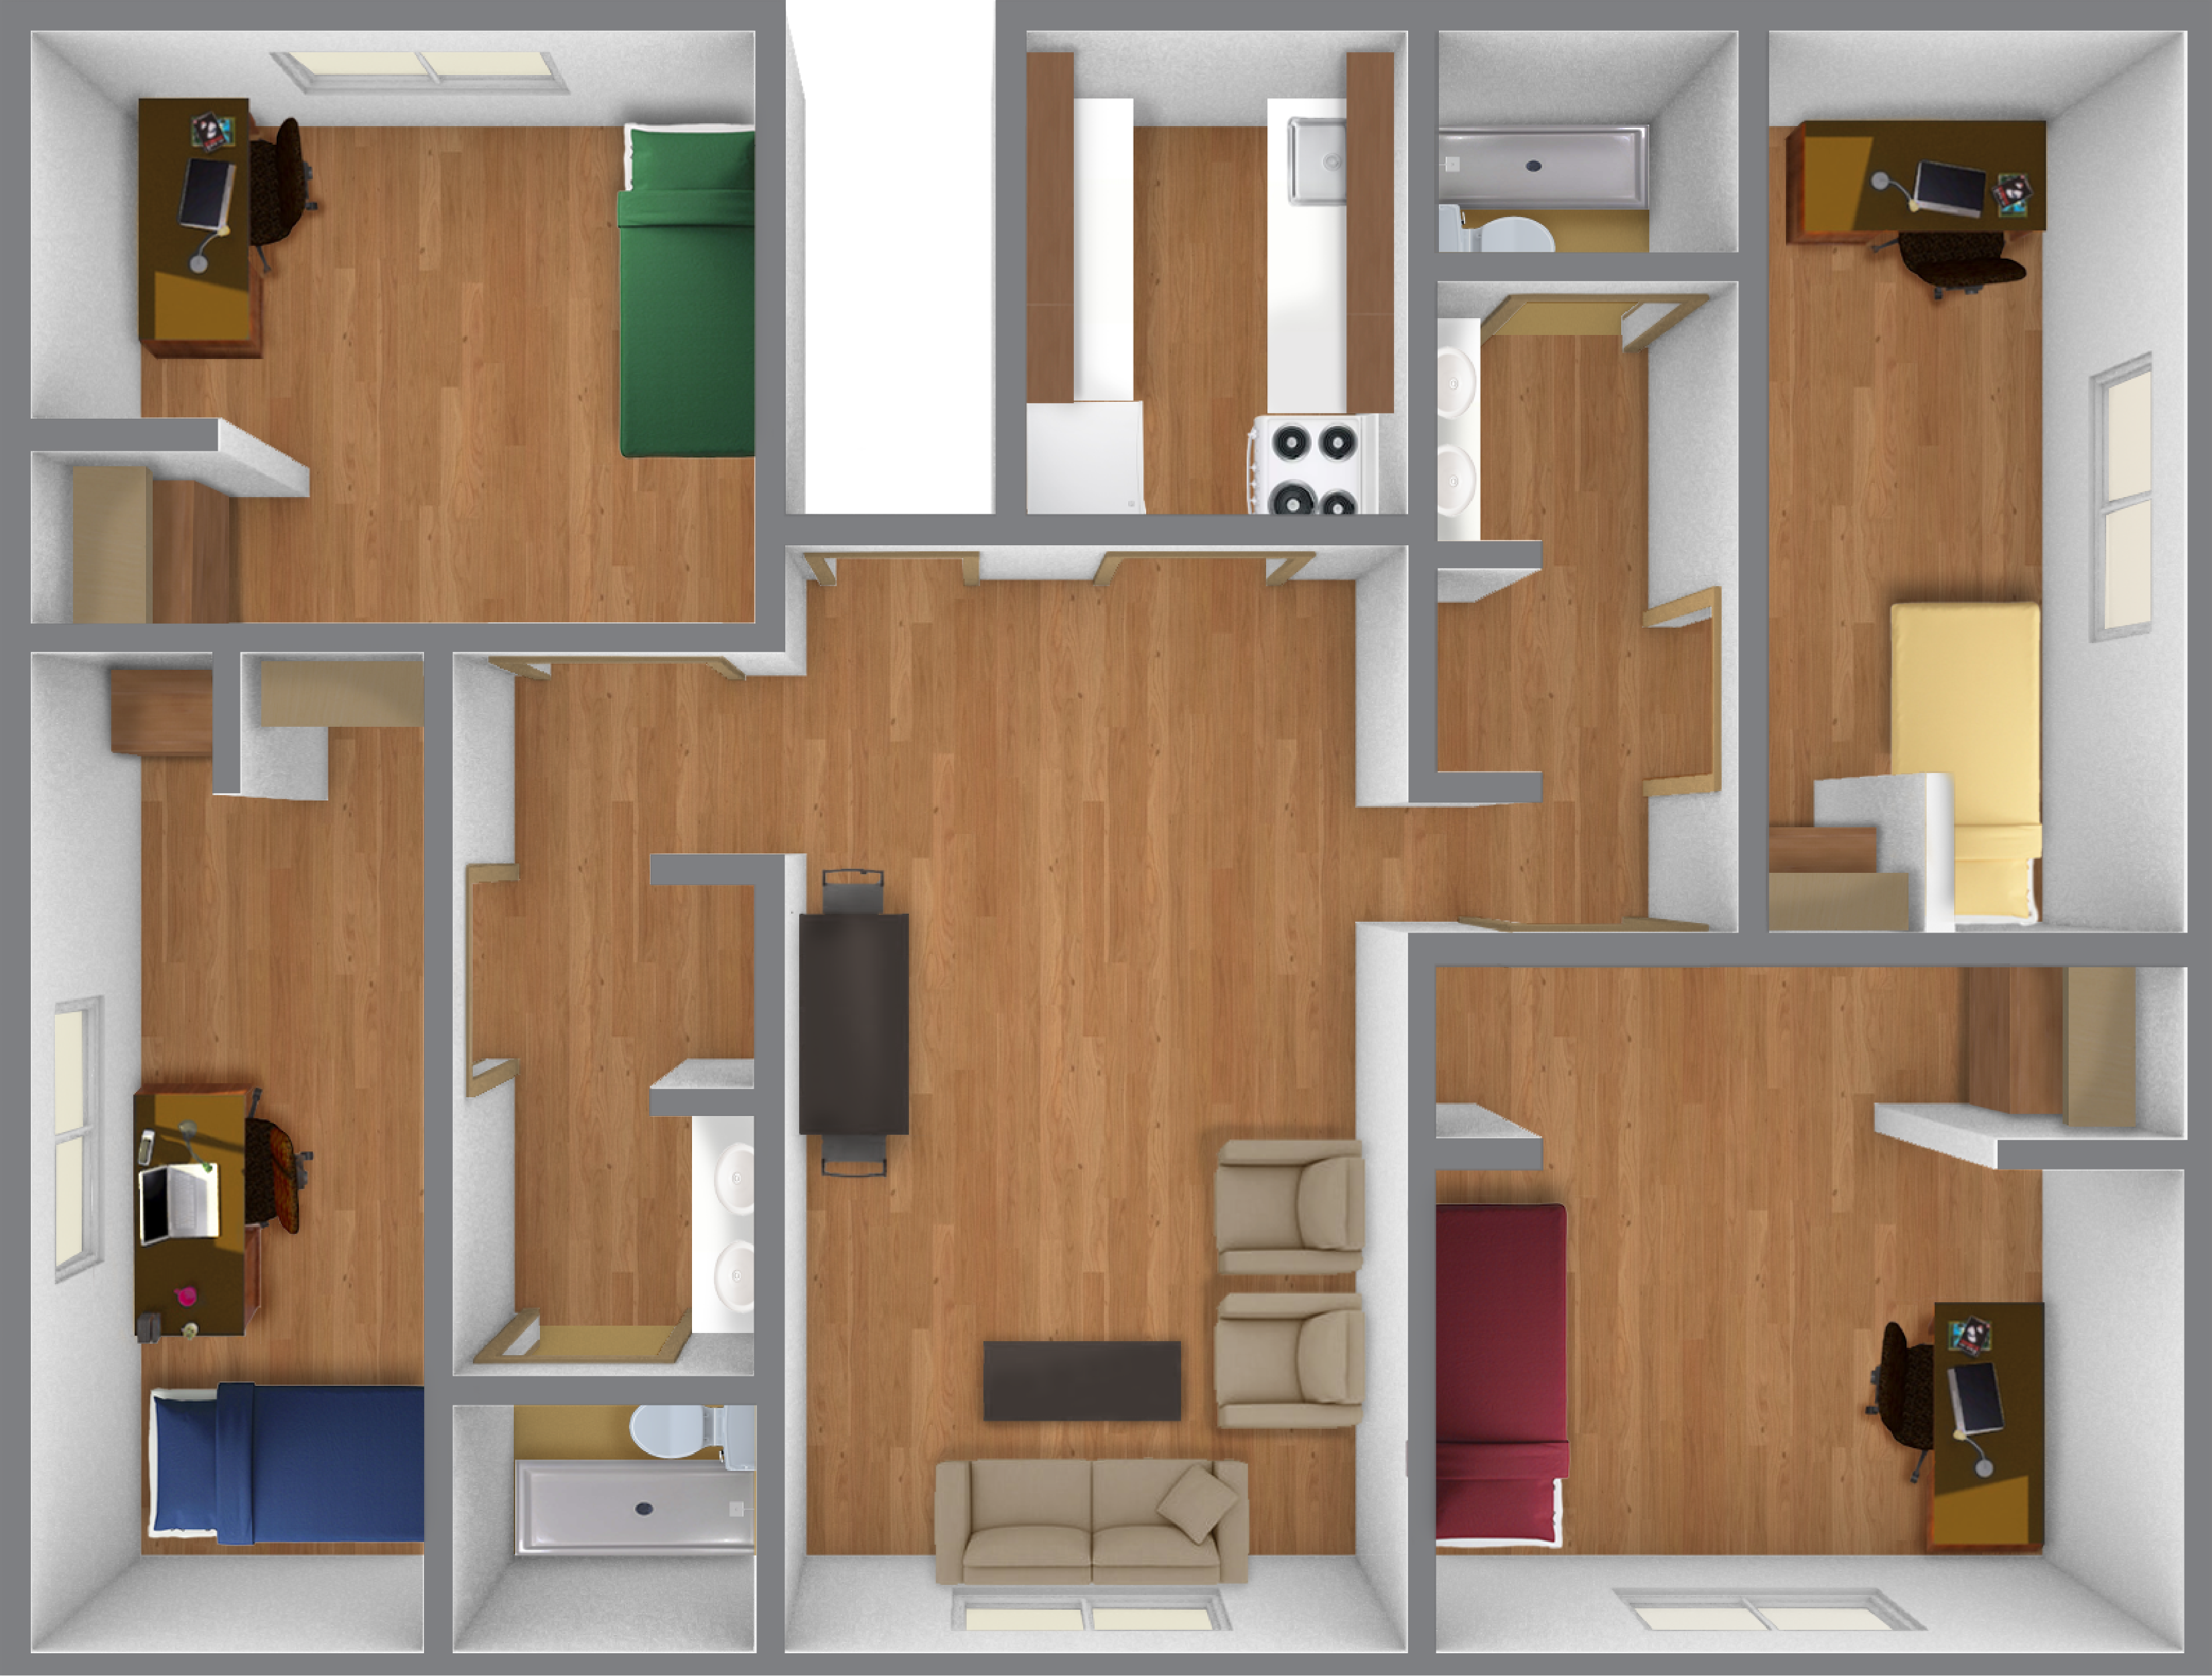 ua-floor-plans_private-4.png